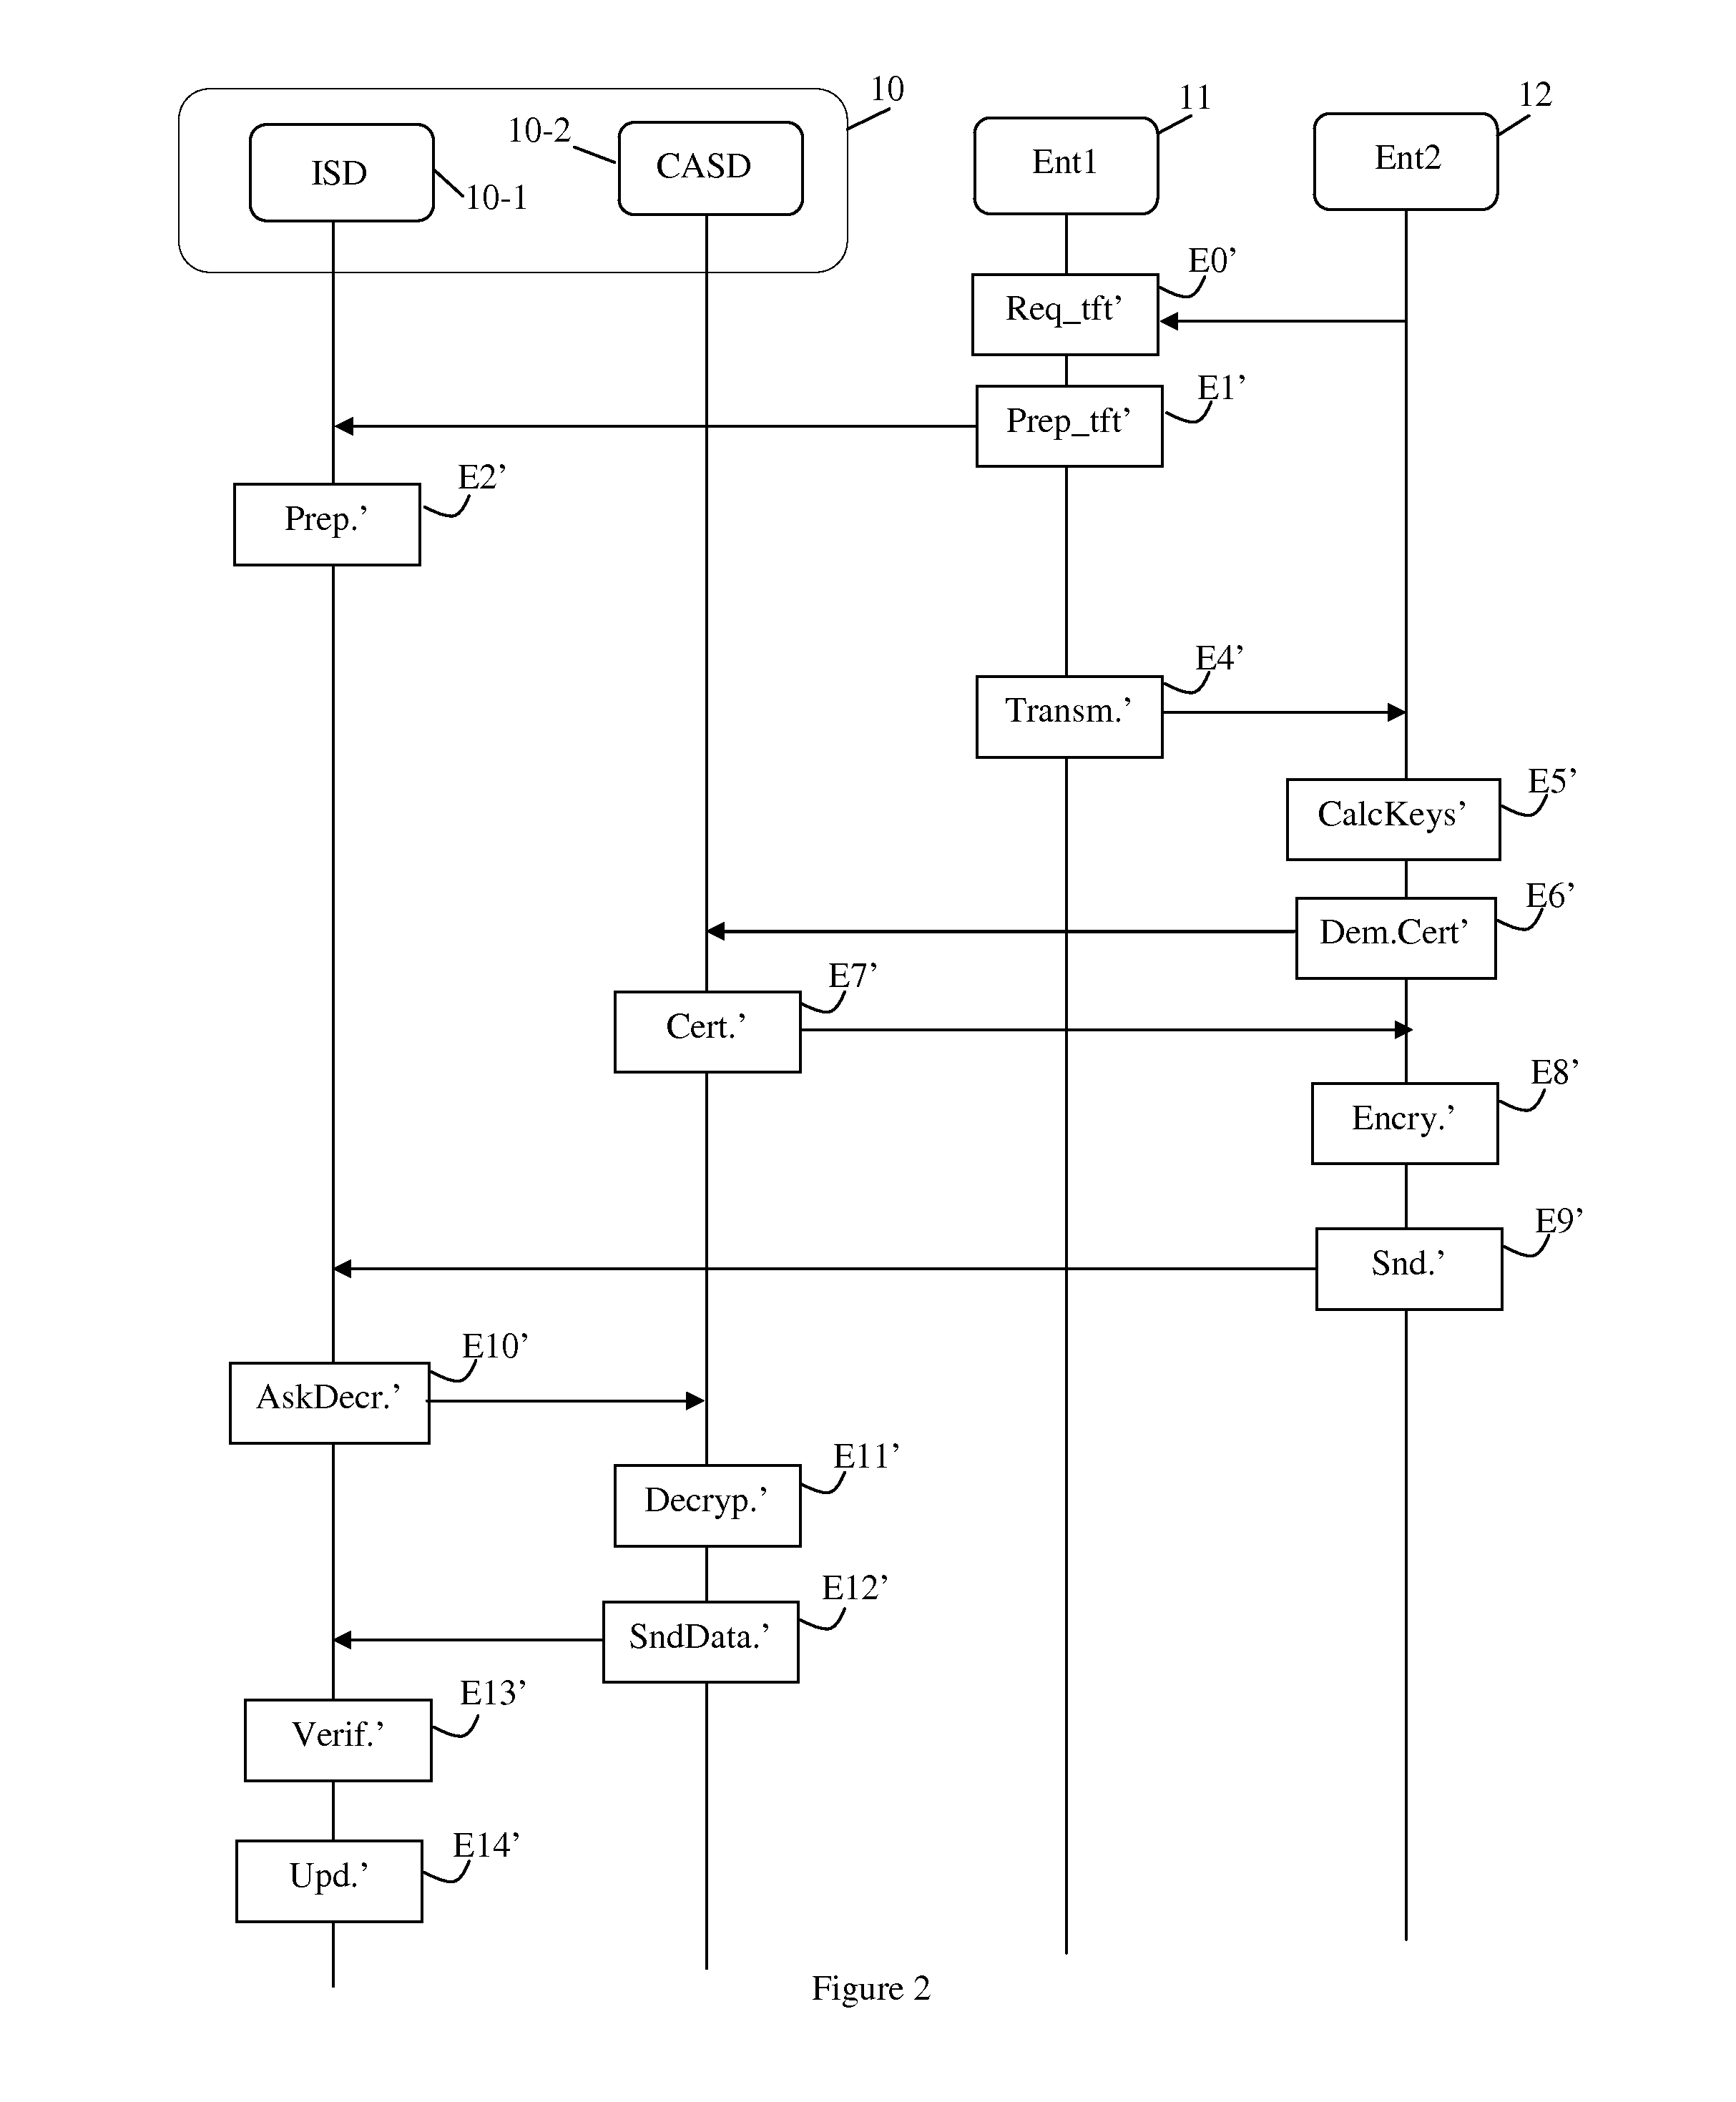 Method of transferring the control of a security module from a first entity to a second entity